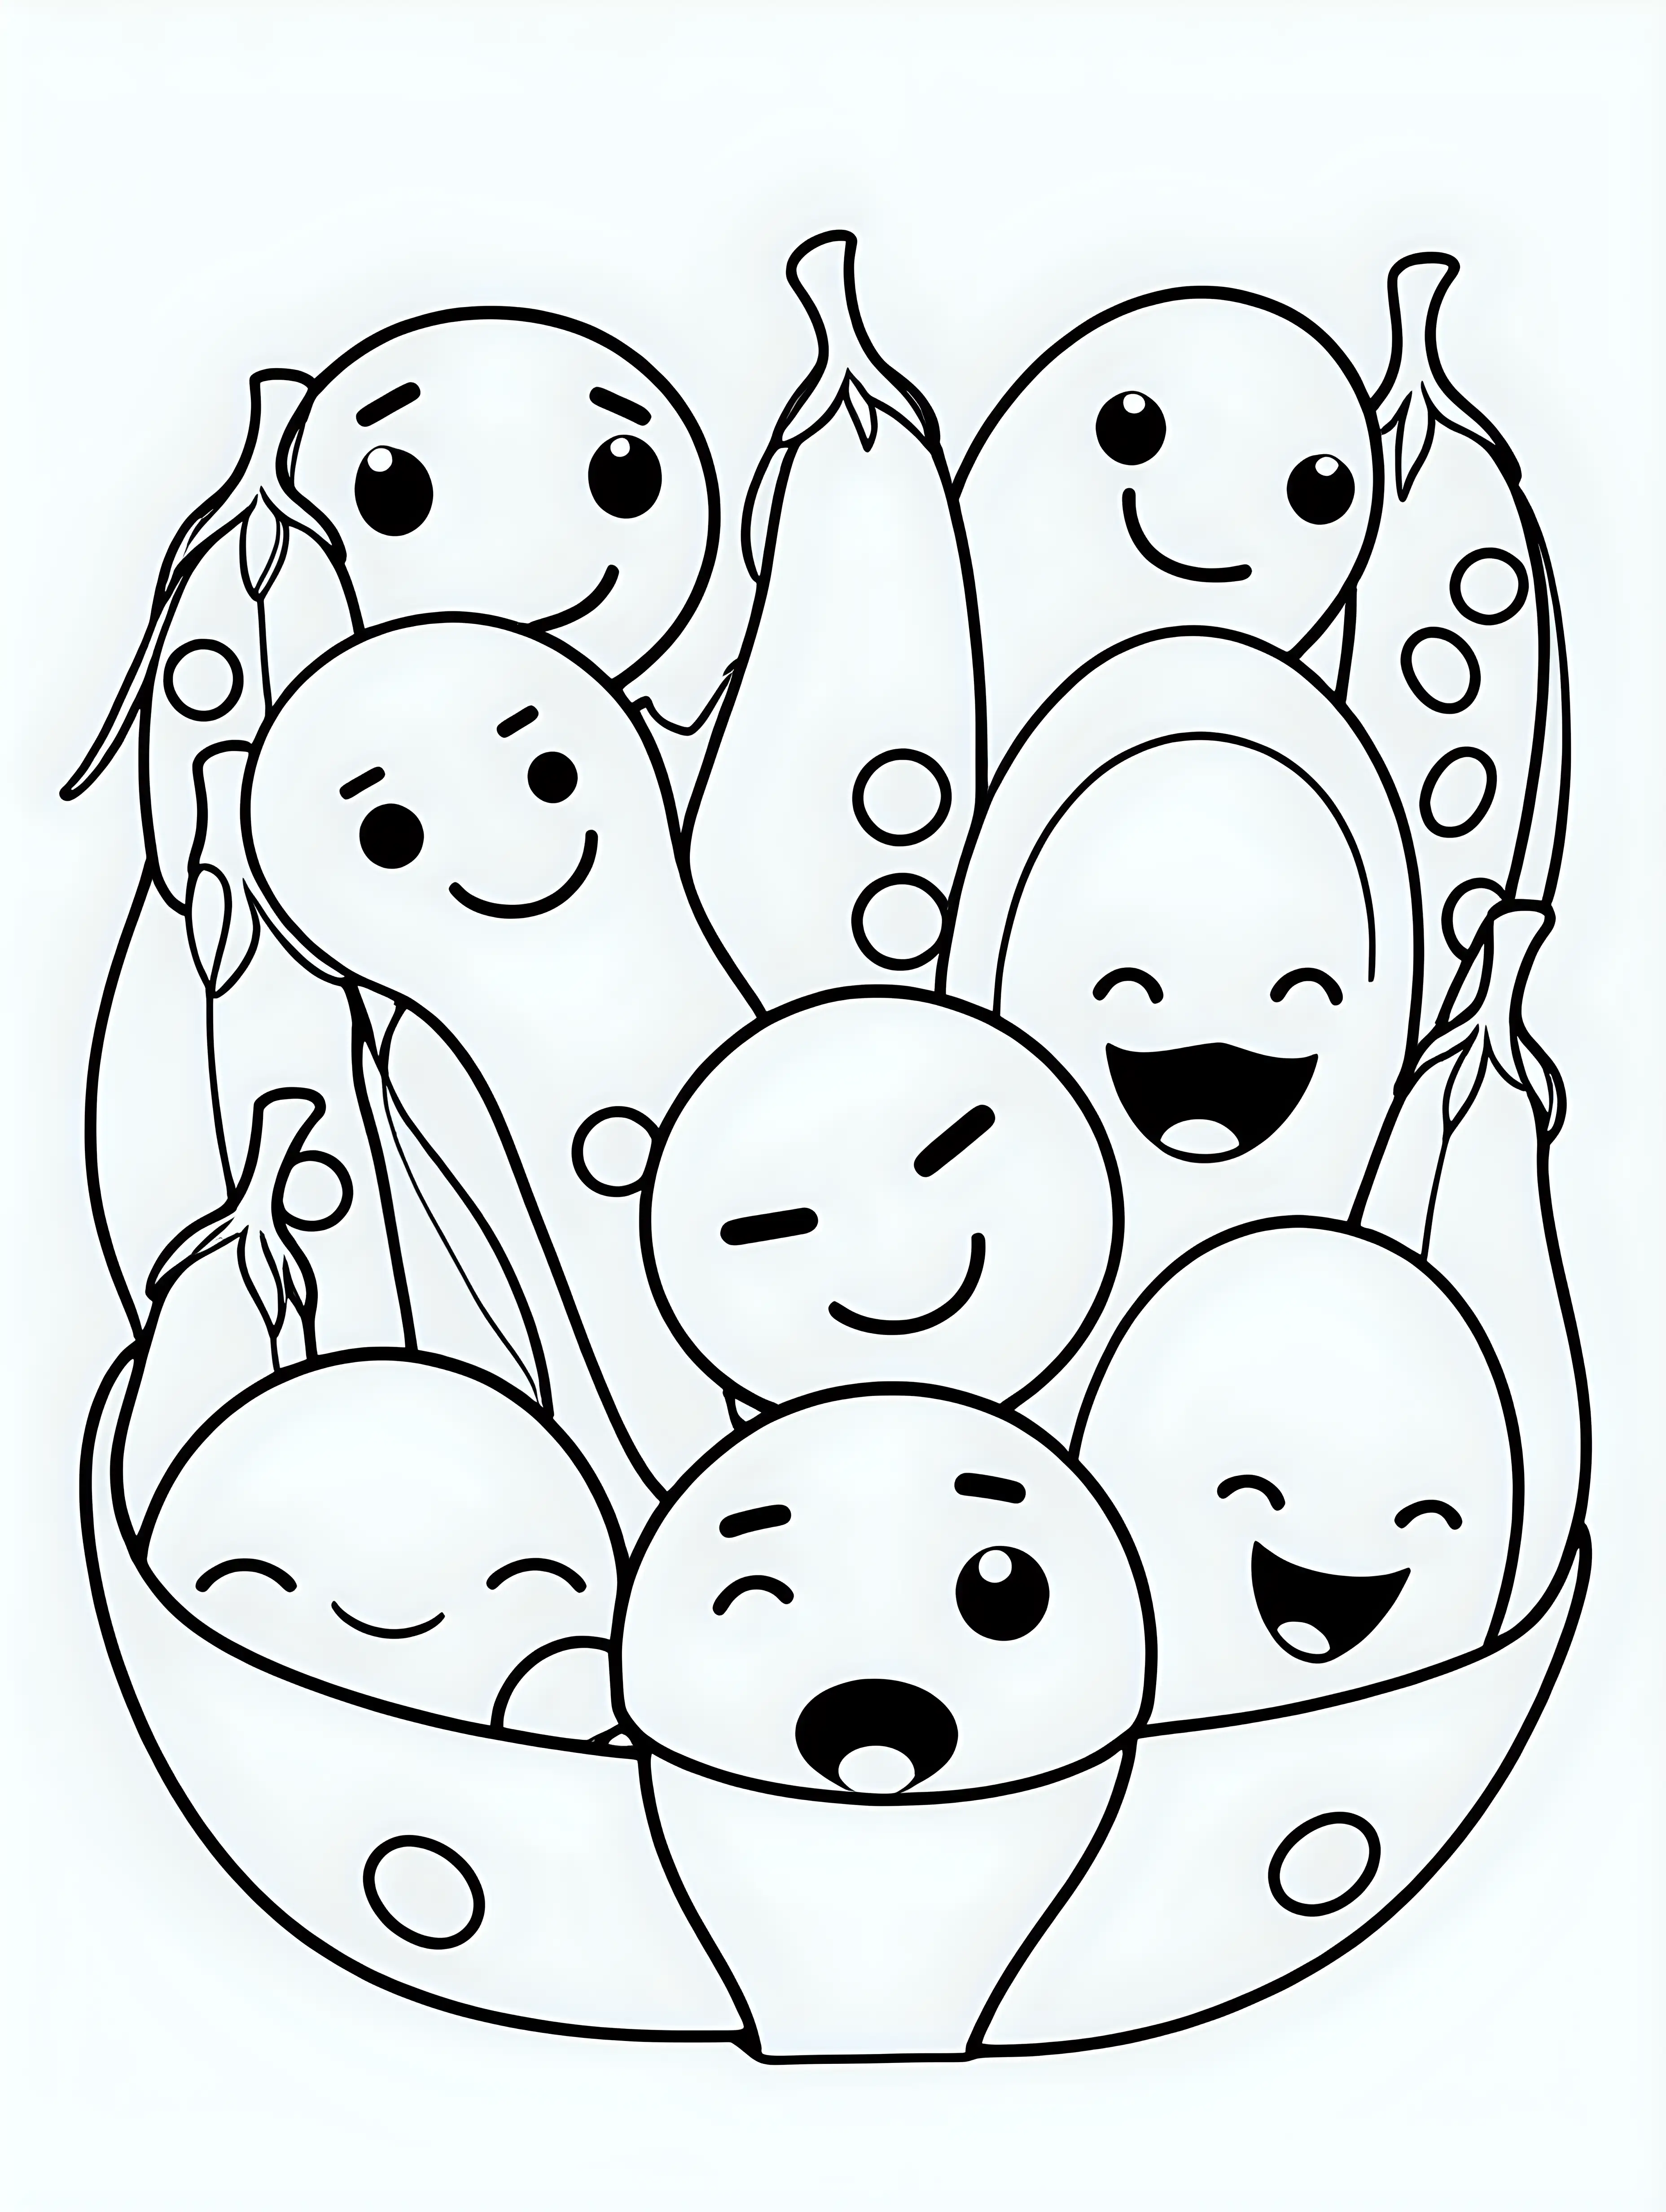 coloring book, cartoon drawing, clean black and white, single line, white background, cute peas and pea pods, emojis